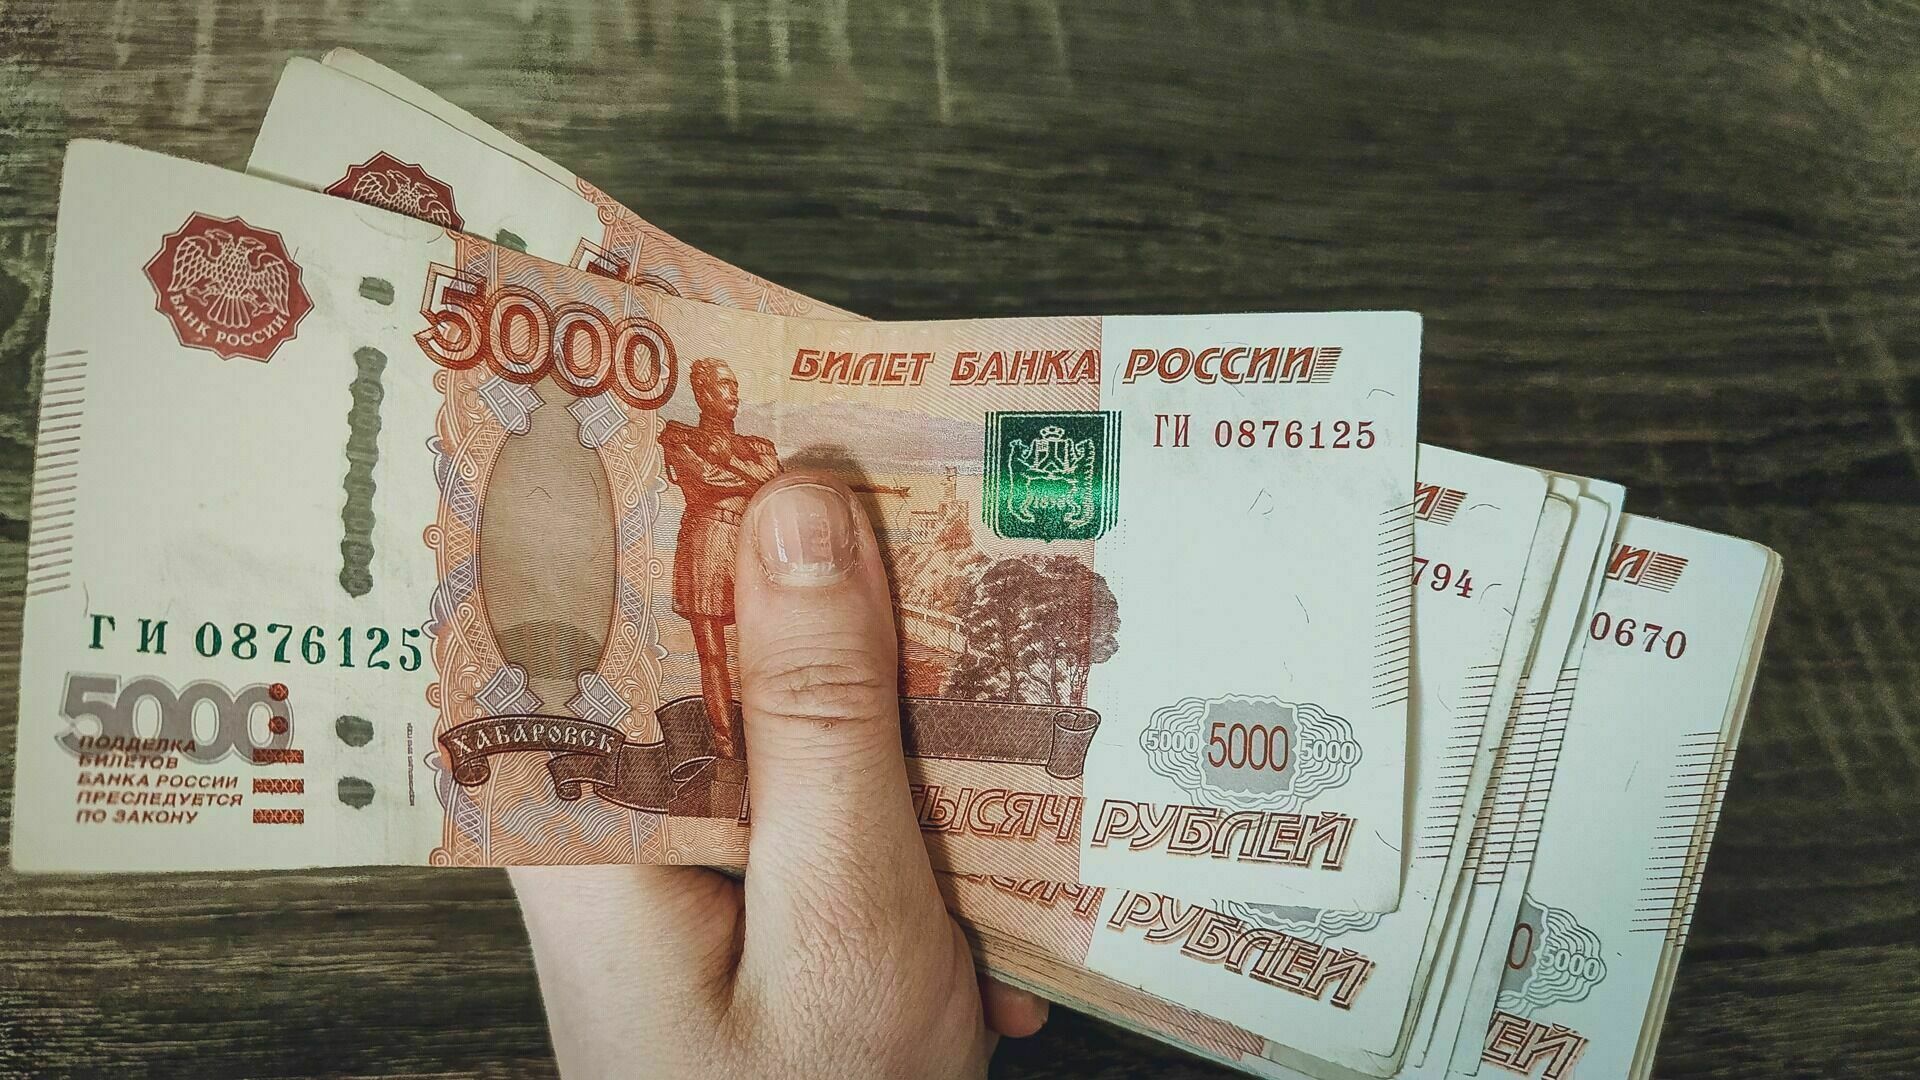 The Ministry of Finance proposed to issue "patriotic" government bonds